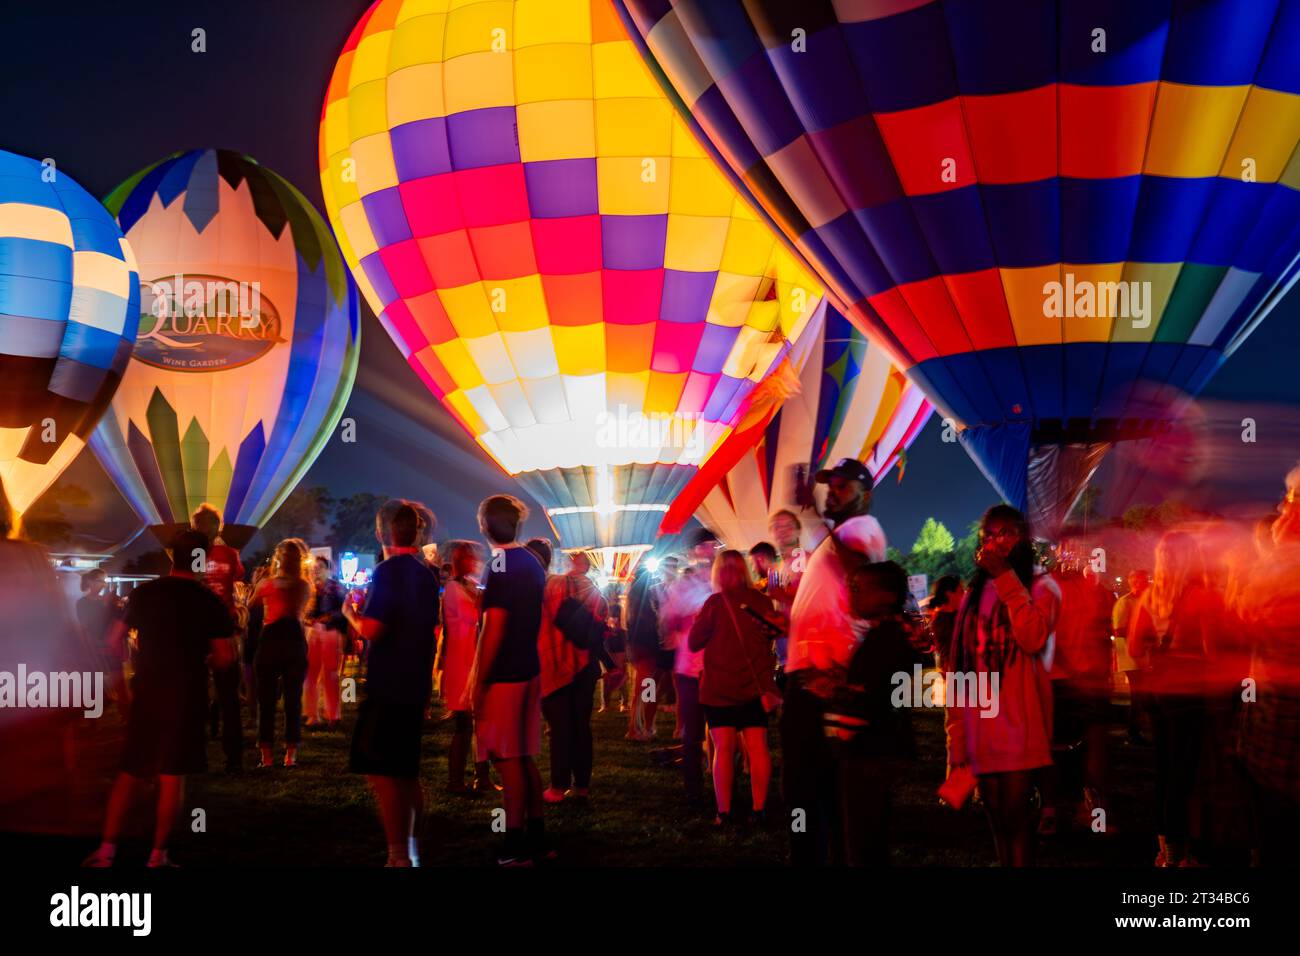 People gather under the glow of Hot Air Balloons Stock Photo